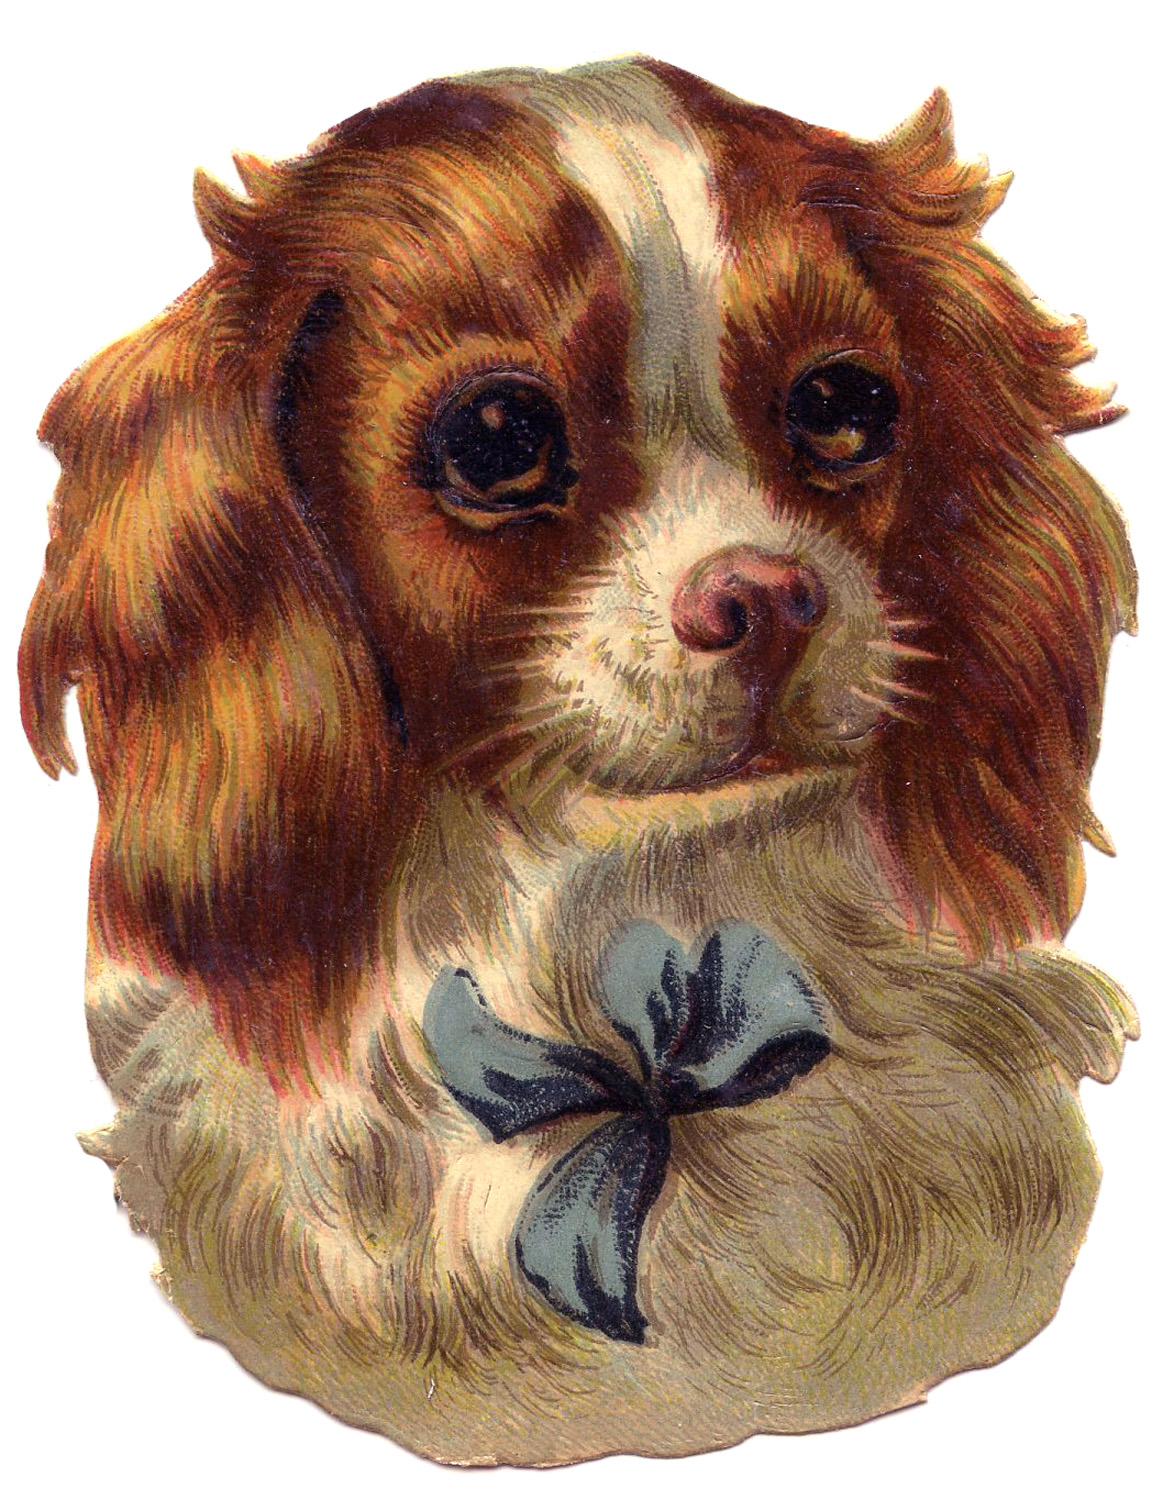 http://thegraphicsfairy.com/wp-content/uploads/2013/02/Vintage-Images-Dog-Spaniel-GraphicsFairy1.jpg